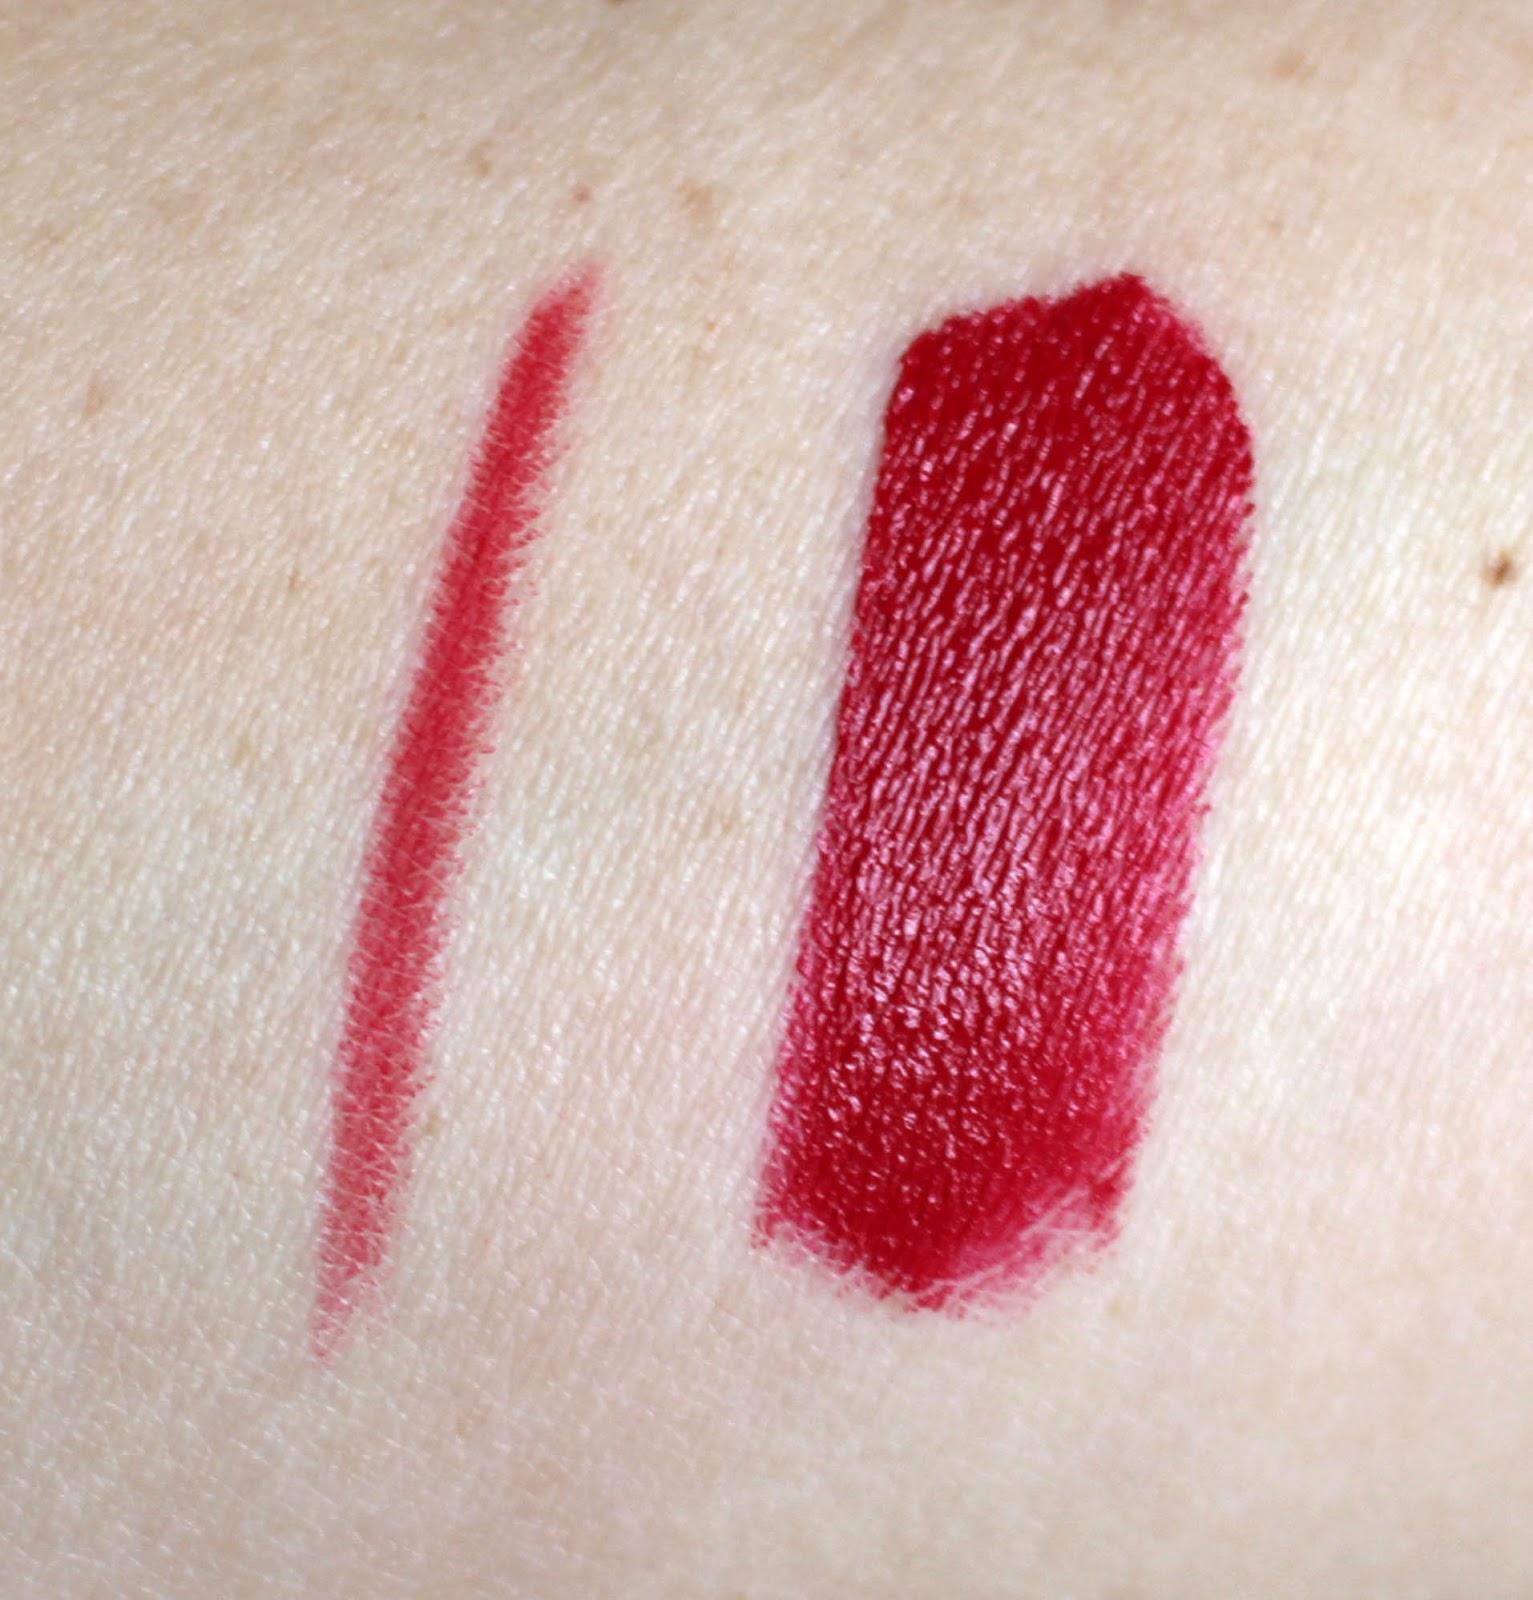 Pondering Beauty Chanel Rouge Allure Luminous Intense Lip Colour In 99 Pirate